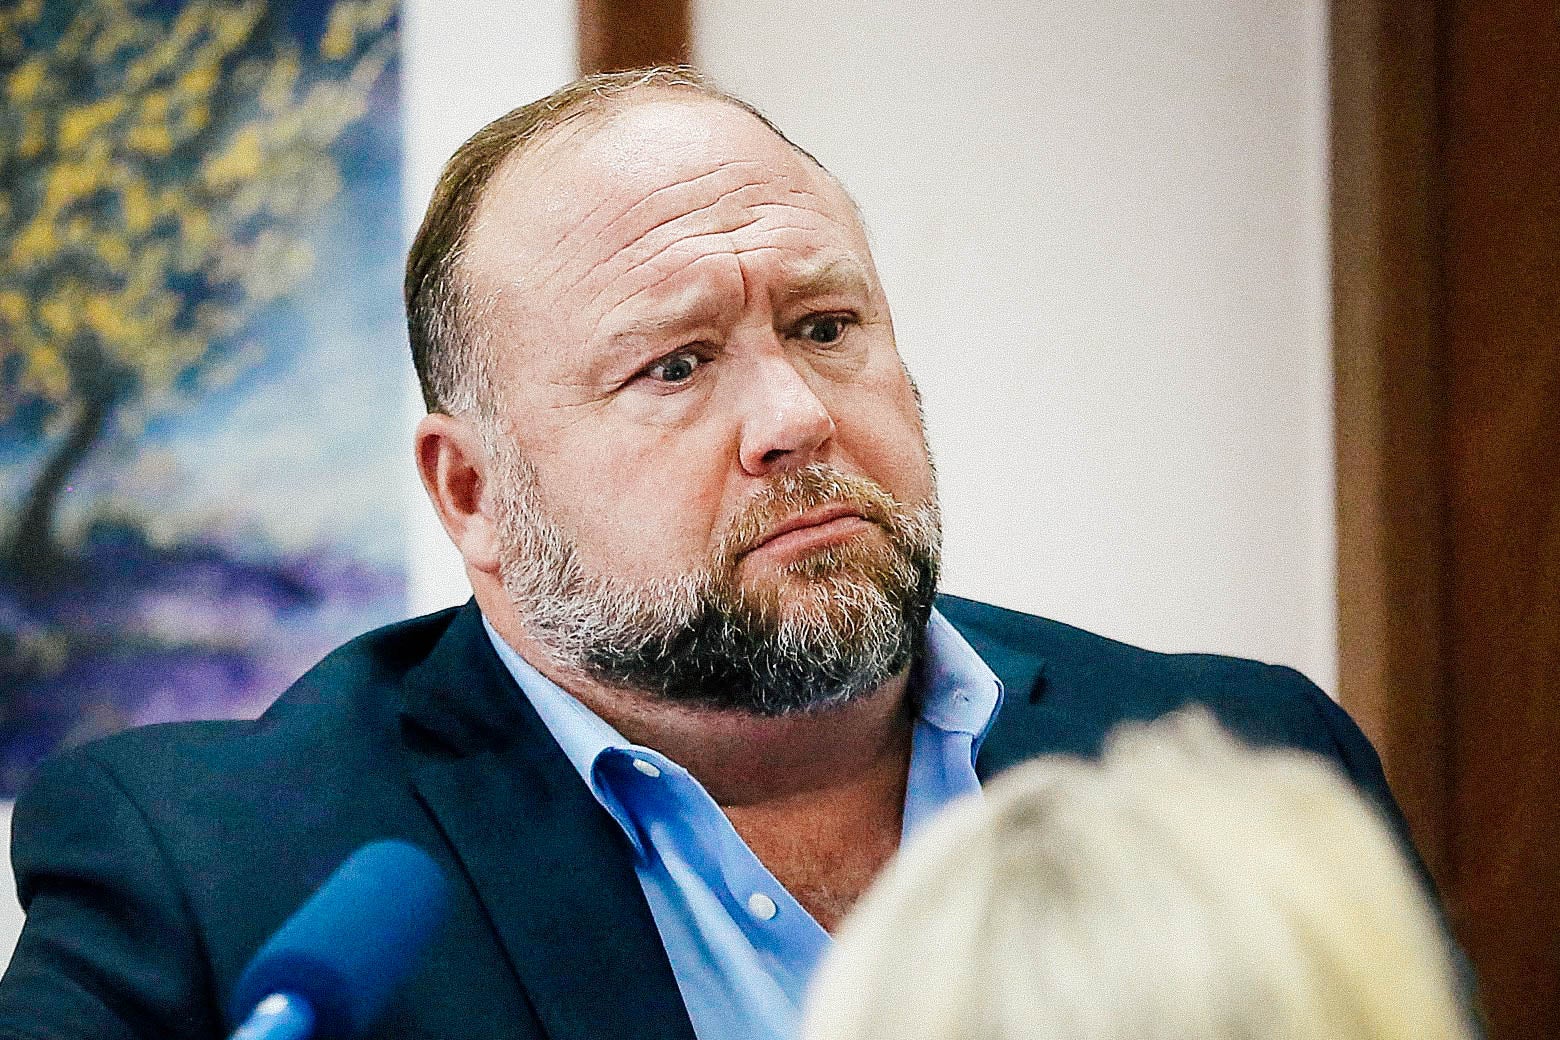 Alex Jones attempts to answer questions about his emails asked by Mark Bankston, lawyer for Neil Heslin and Scarlett Lewis, during trial at the Travis County Courthouse, Austin, Texas, U.S., August 3, 2022.

